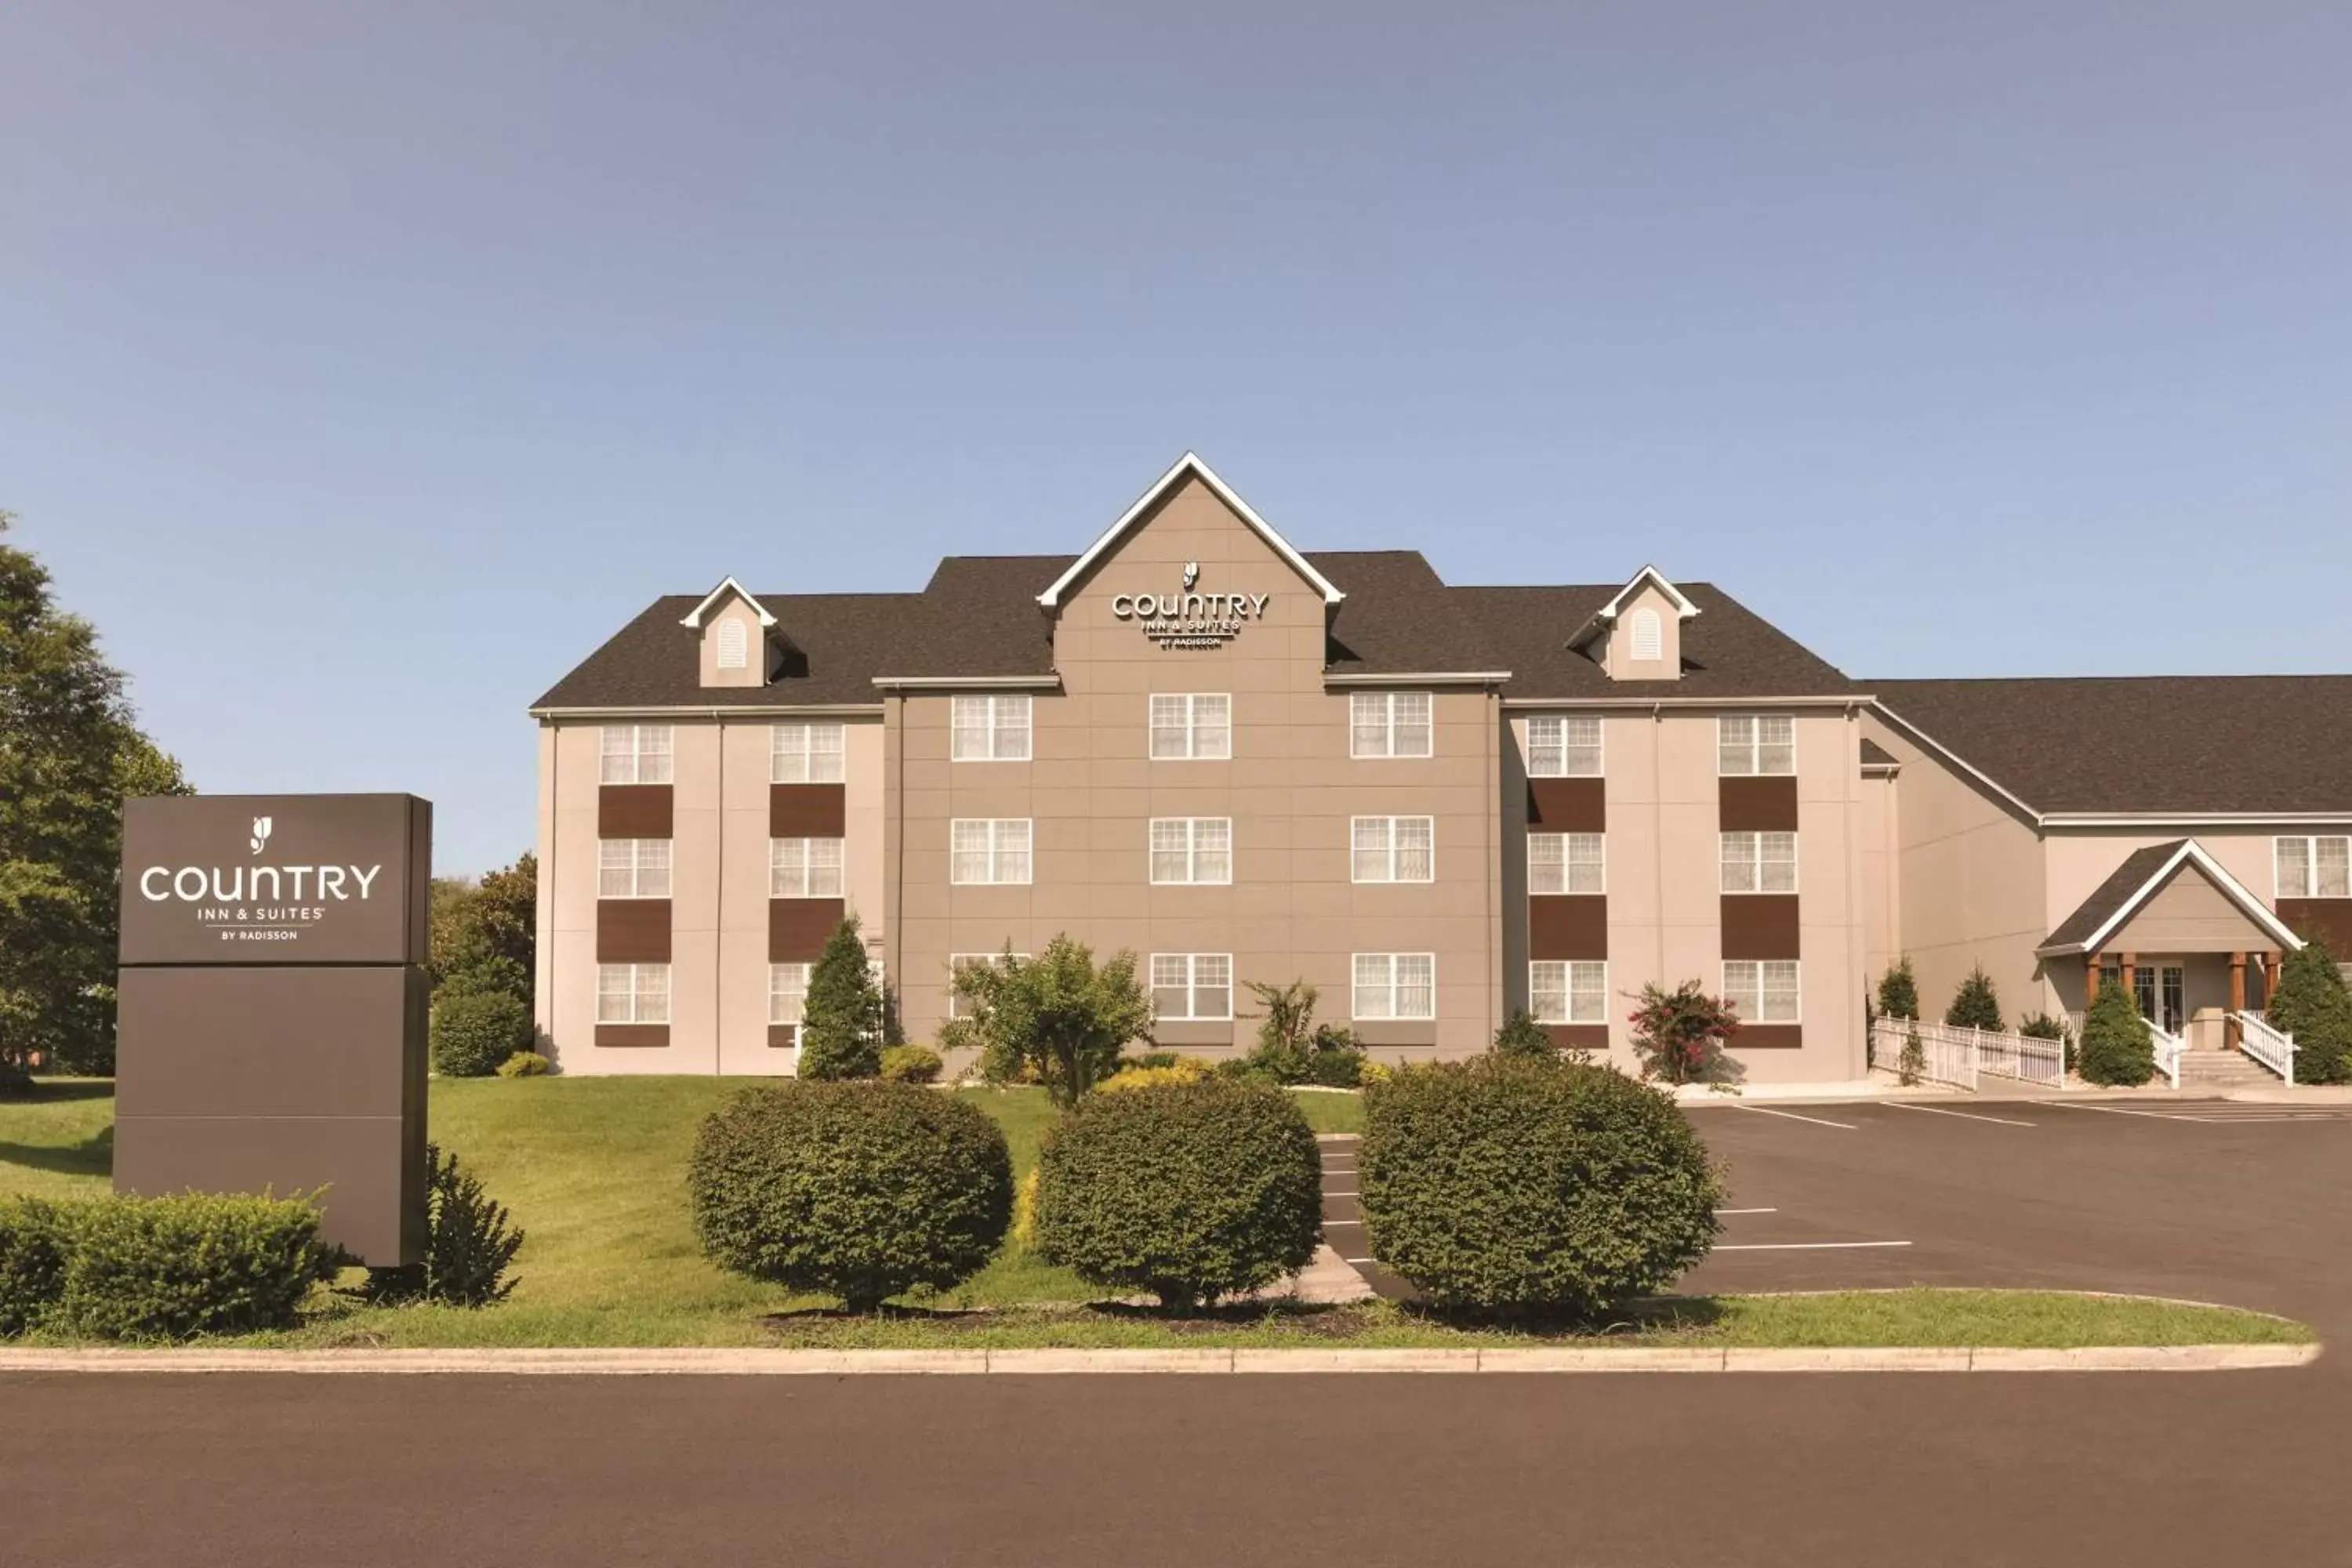 Property Building in Country Inn & Suites by Radisson, Roanoke, VA